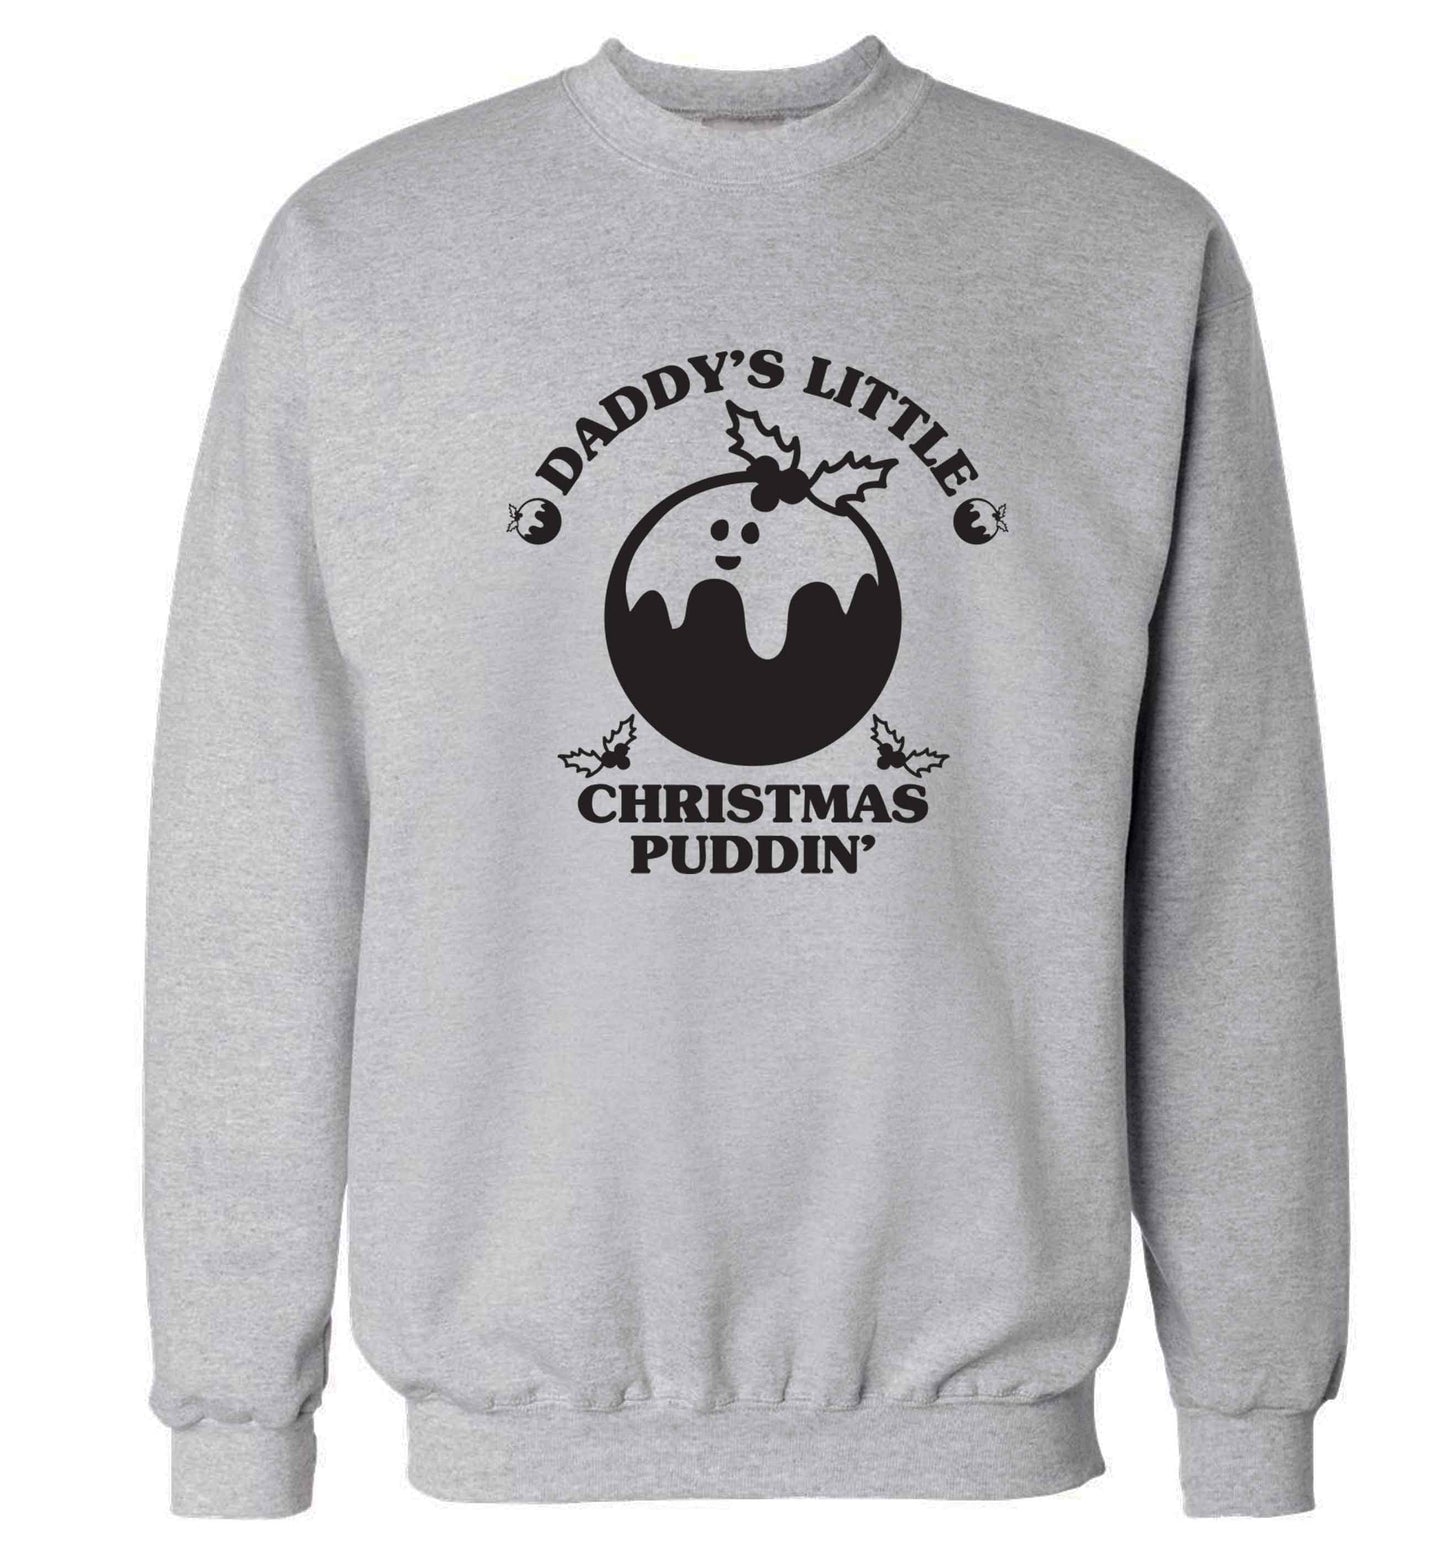 Daddy's little Christmas puddin' Adult's unisex grey Sweater 2XL